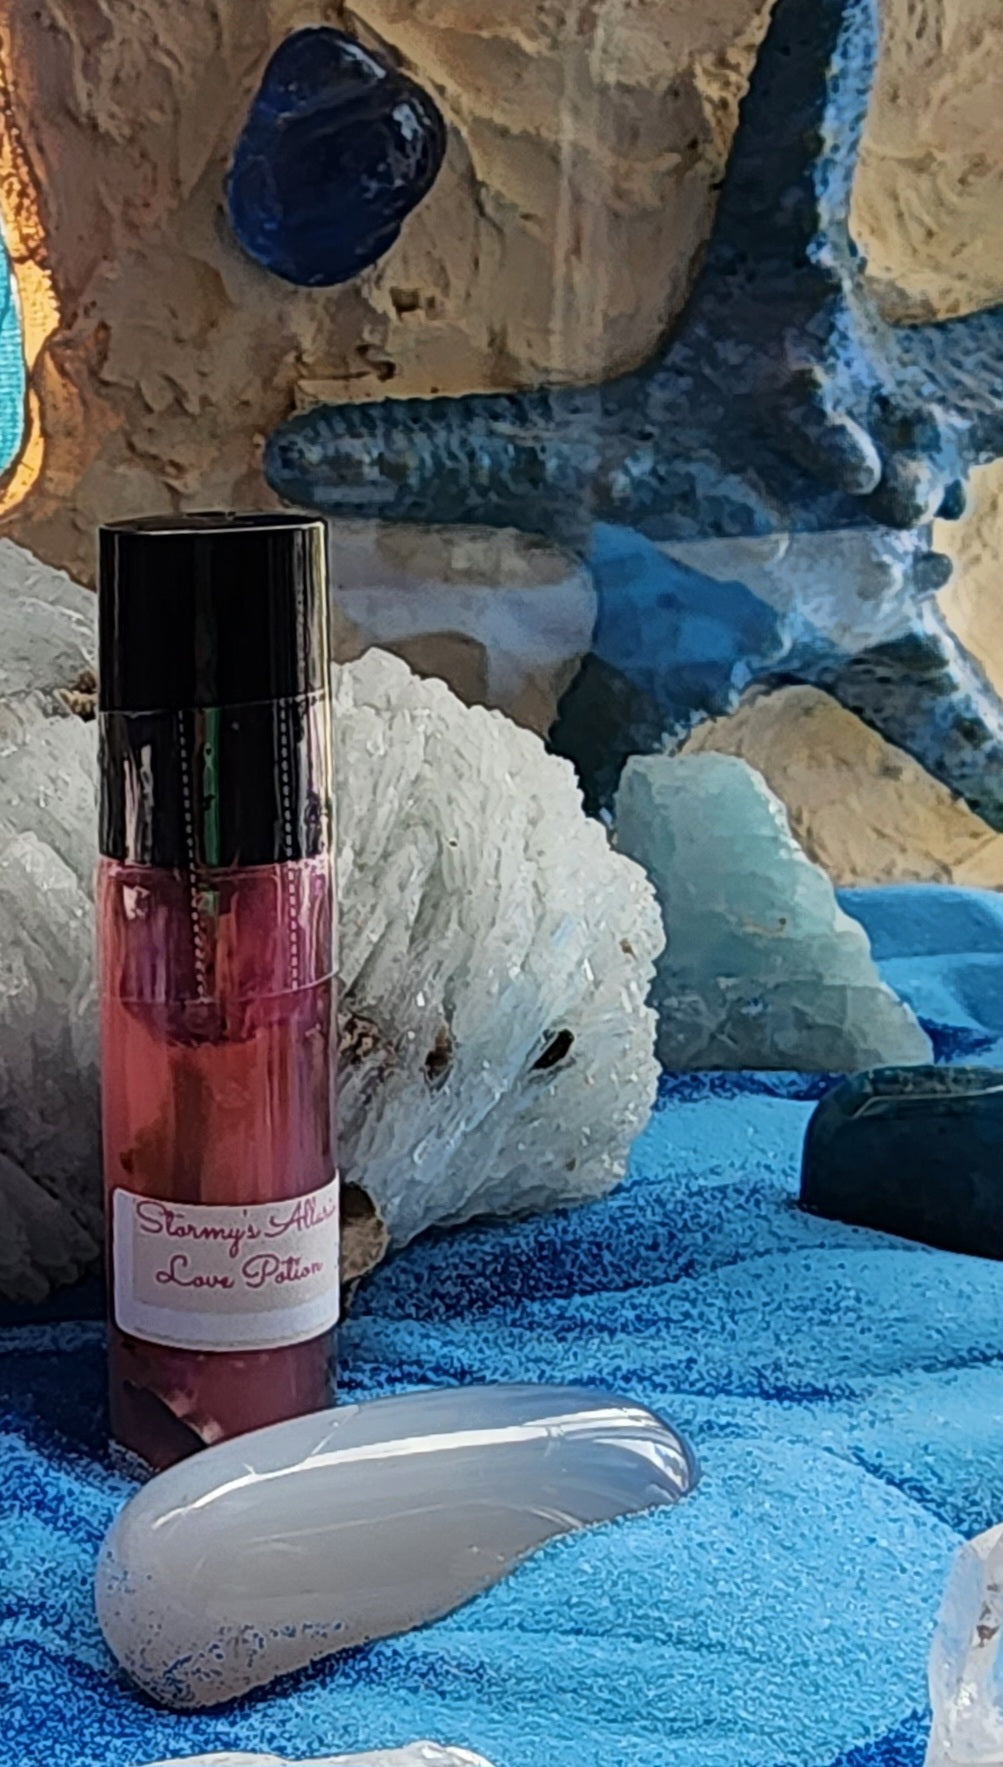 Stormy's Alluring Love Potion - Strong Potion for Attraction & Love Connection!